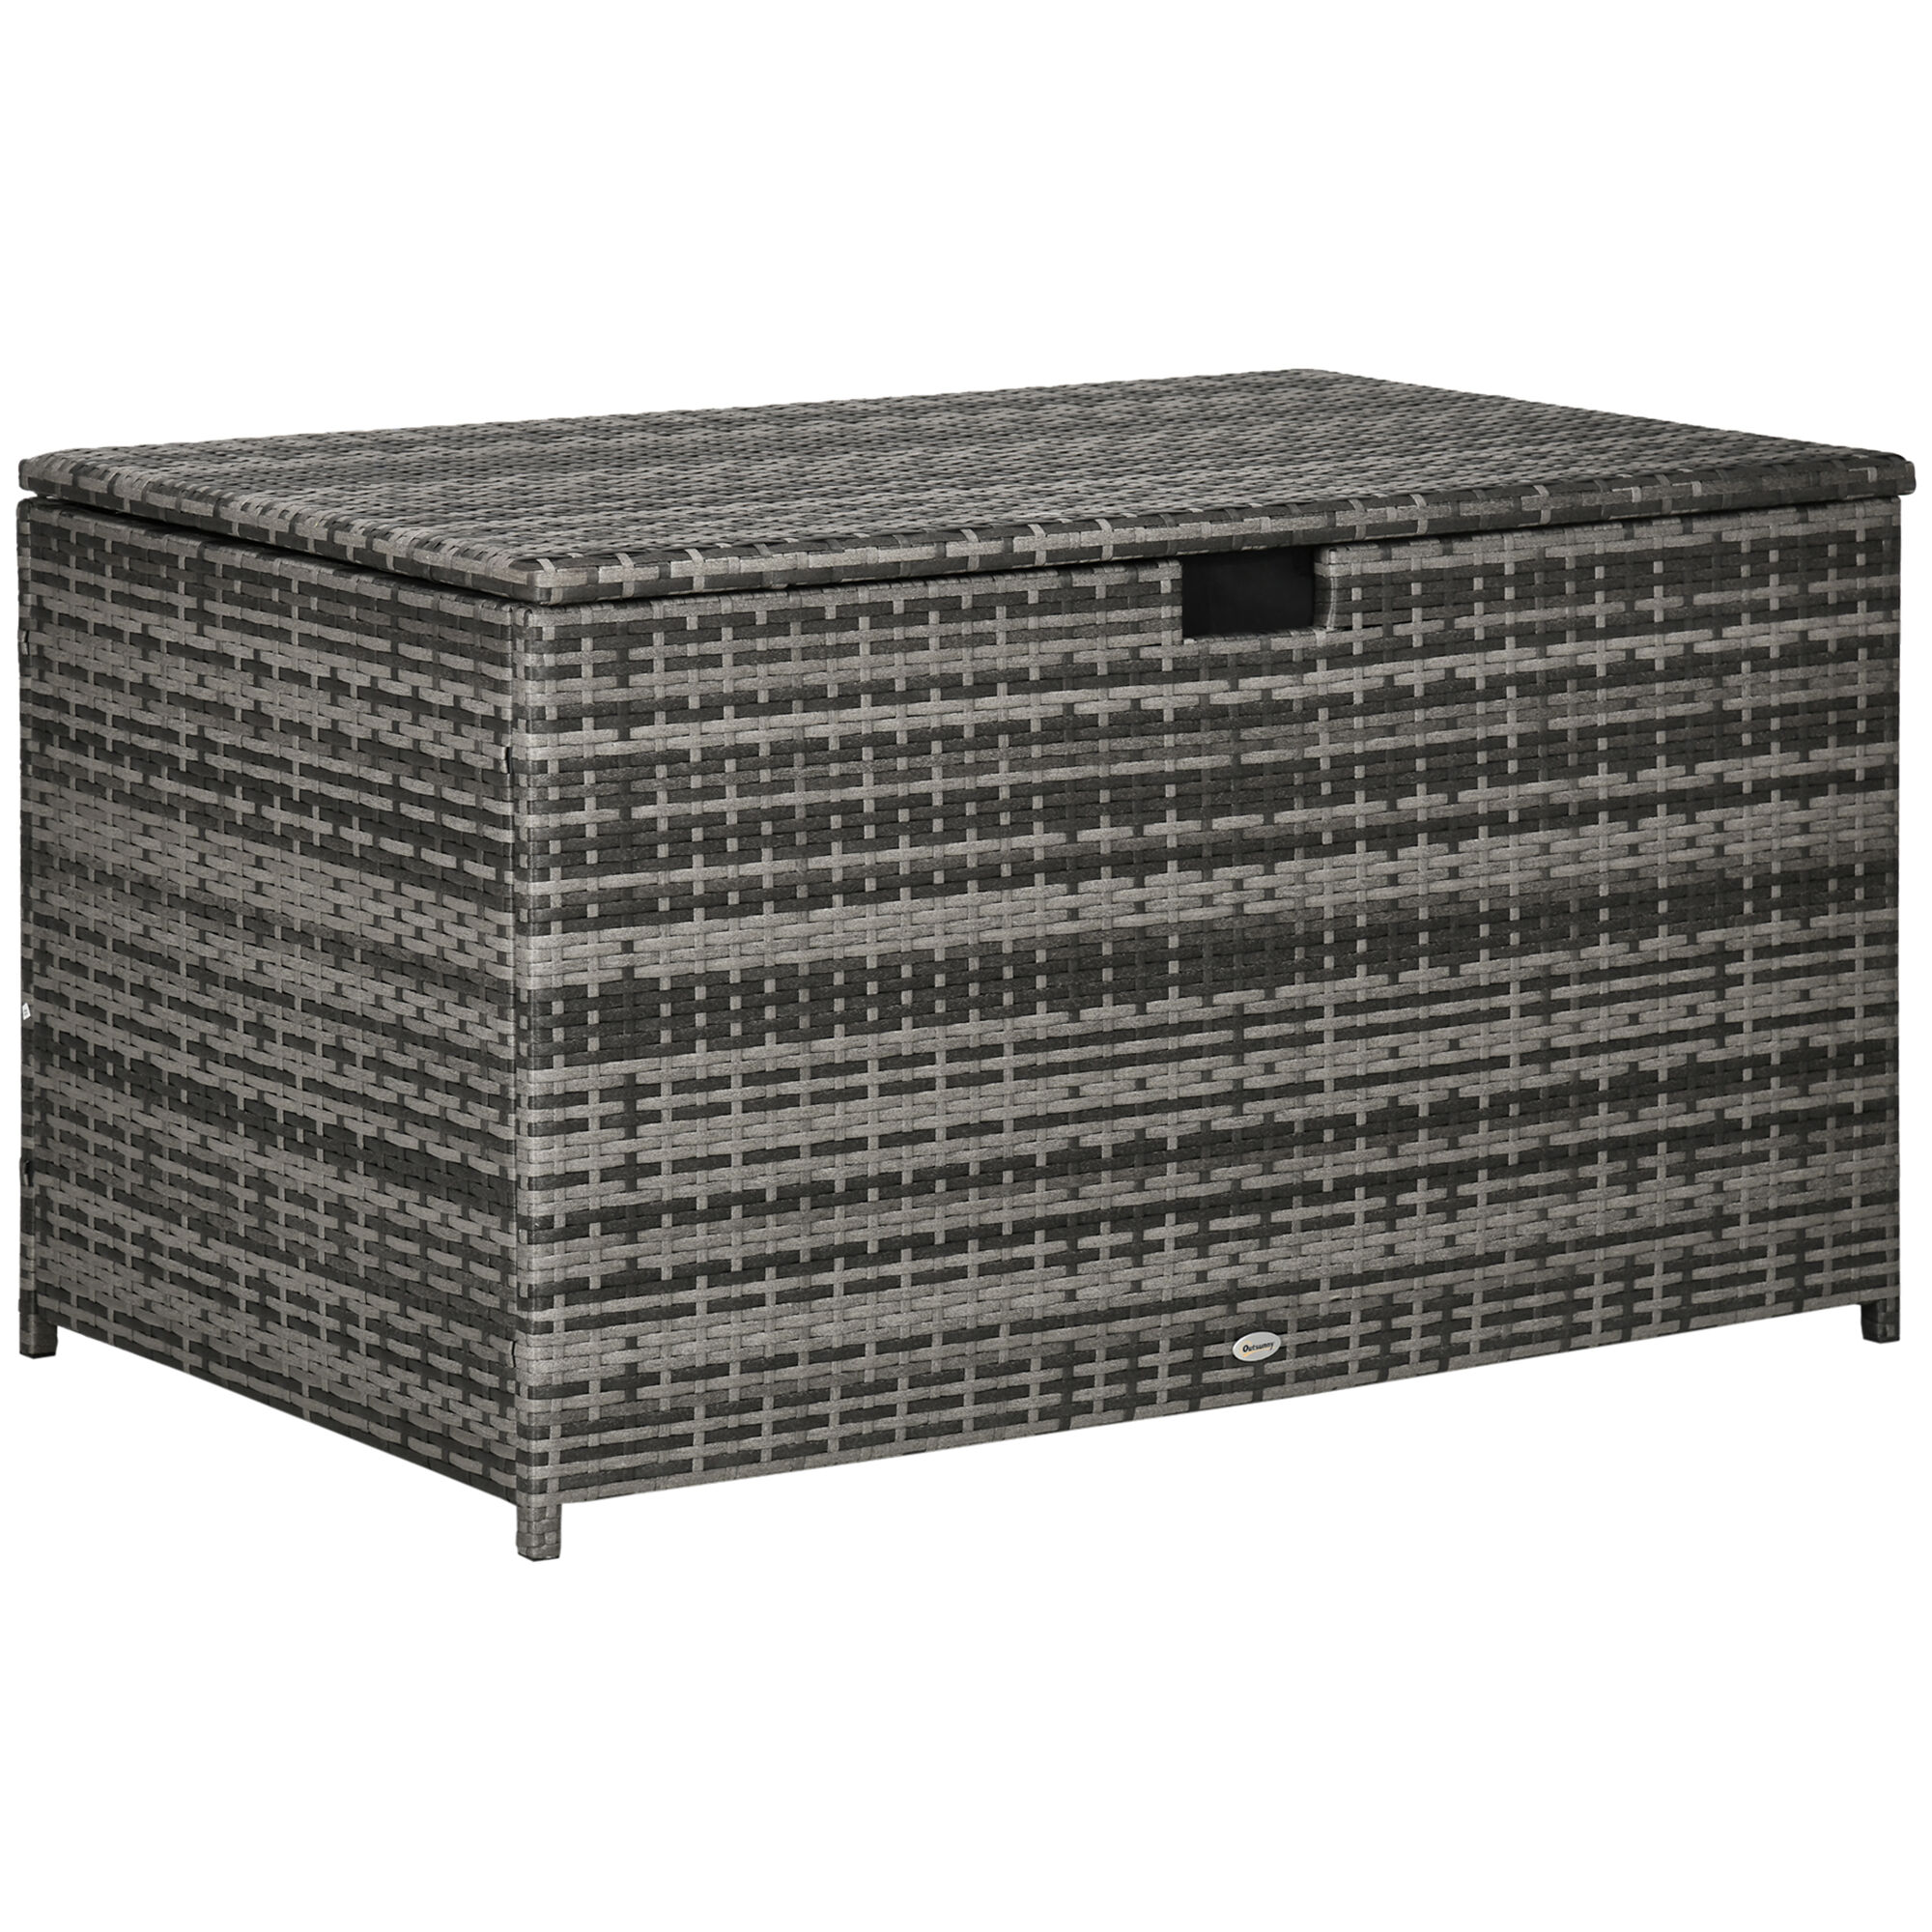 Outsunny Outdoor Deck Box, PE Rattan Wicker with Liner, Hydraulic Lift & Handle for Indoor, Outdoor, Patio Furniture, Pool, Toys, Garden Tools, Gray